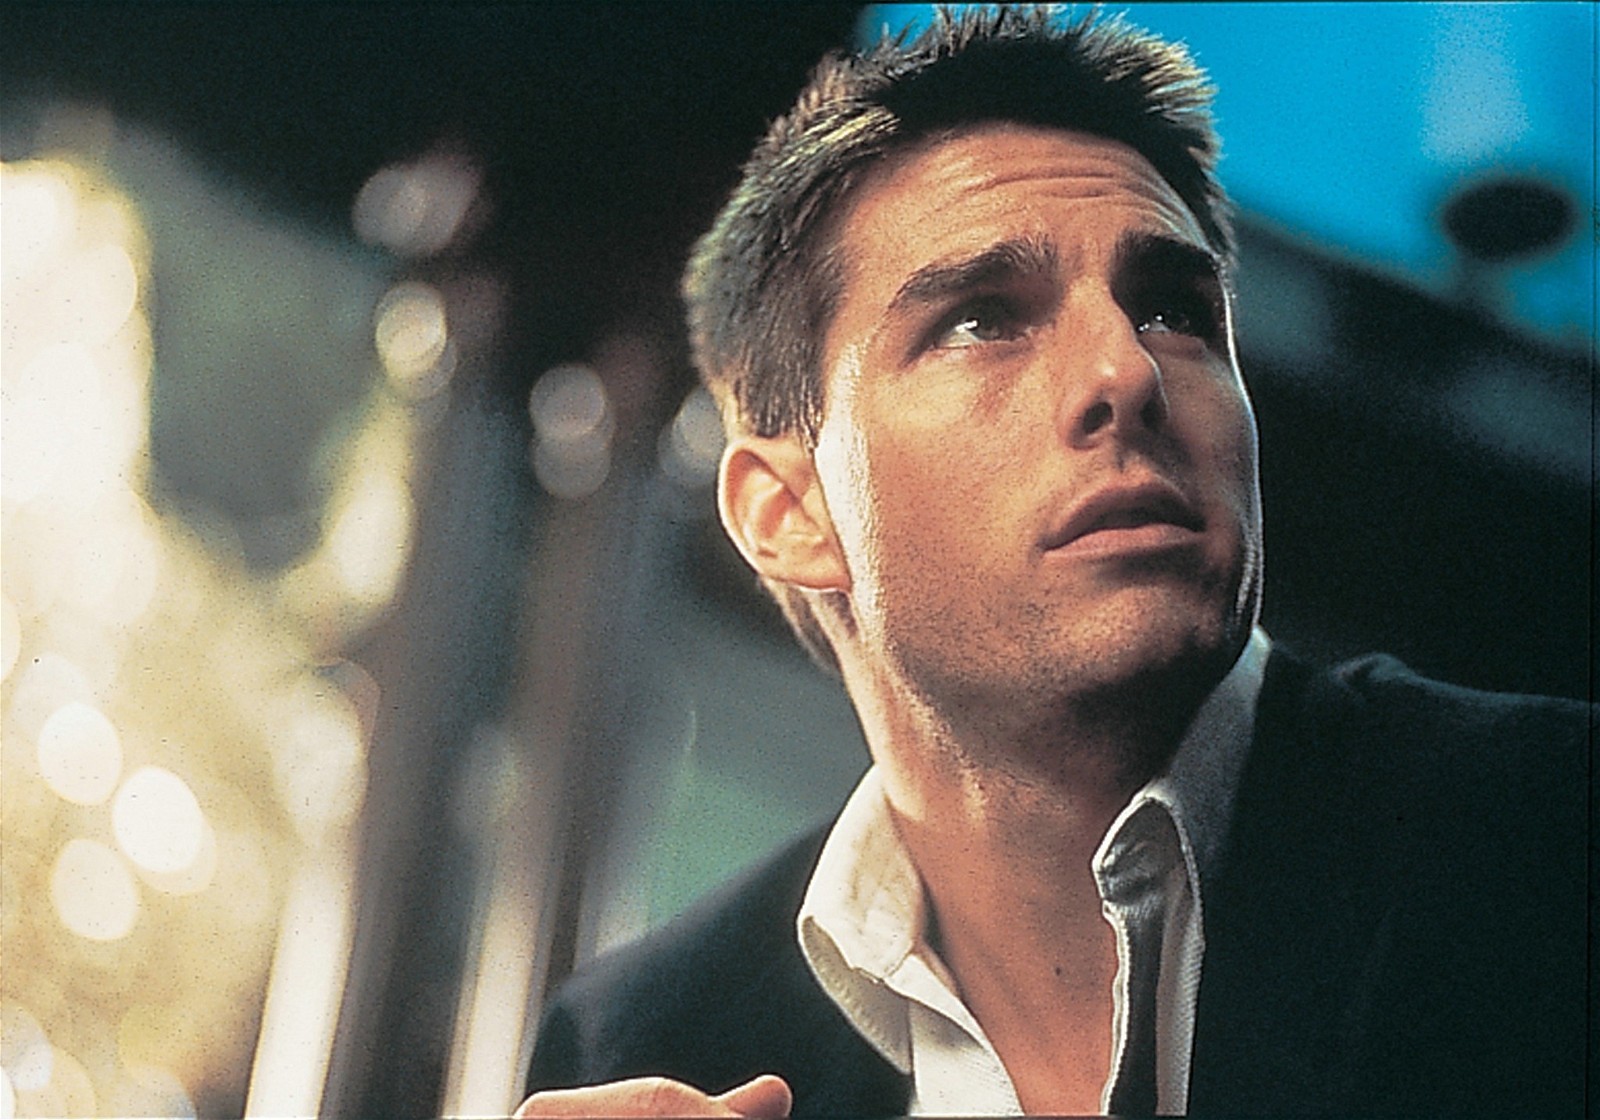 Tom Cruise in a still from Mission Impossible 1 | Paramount Pictures